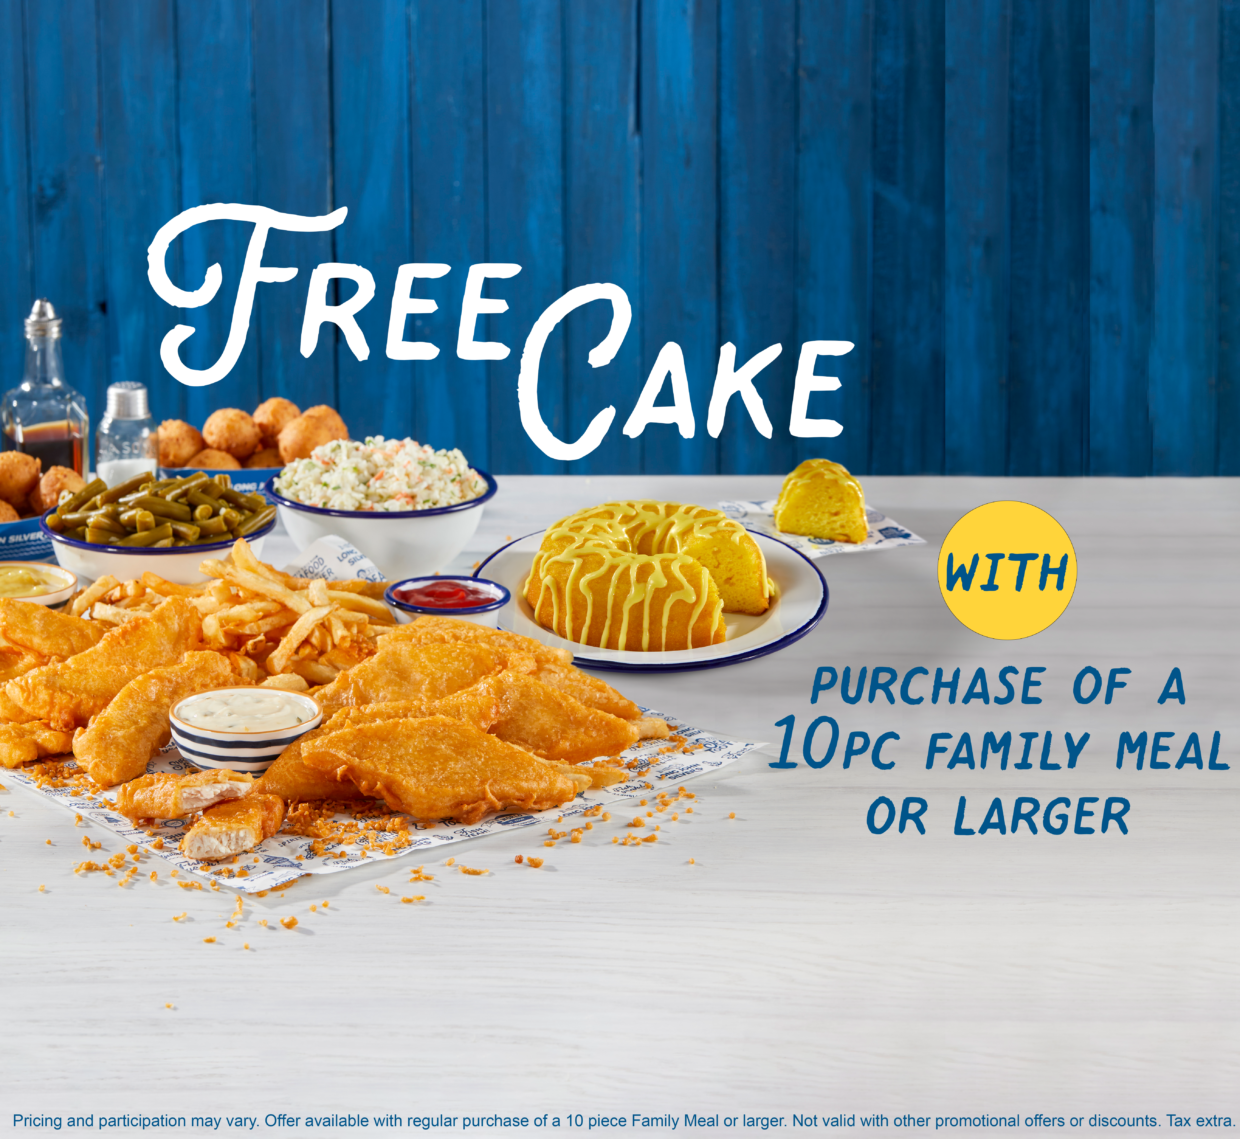 Long John Silvers Offering Free Cake With Family Meal For Limited Time